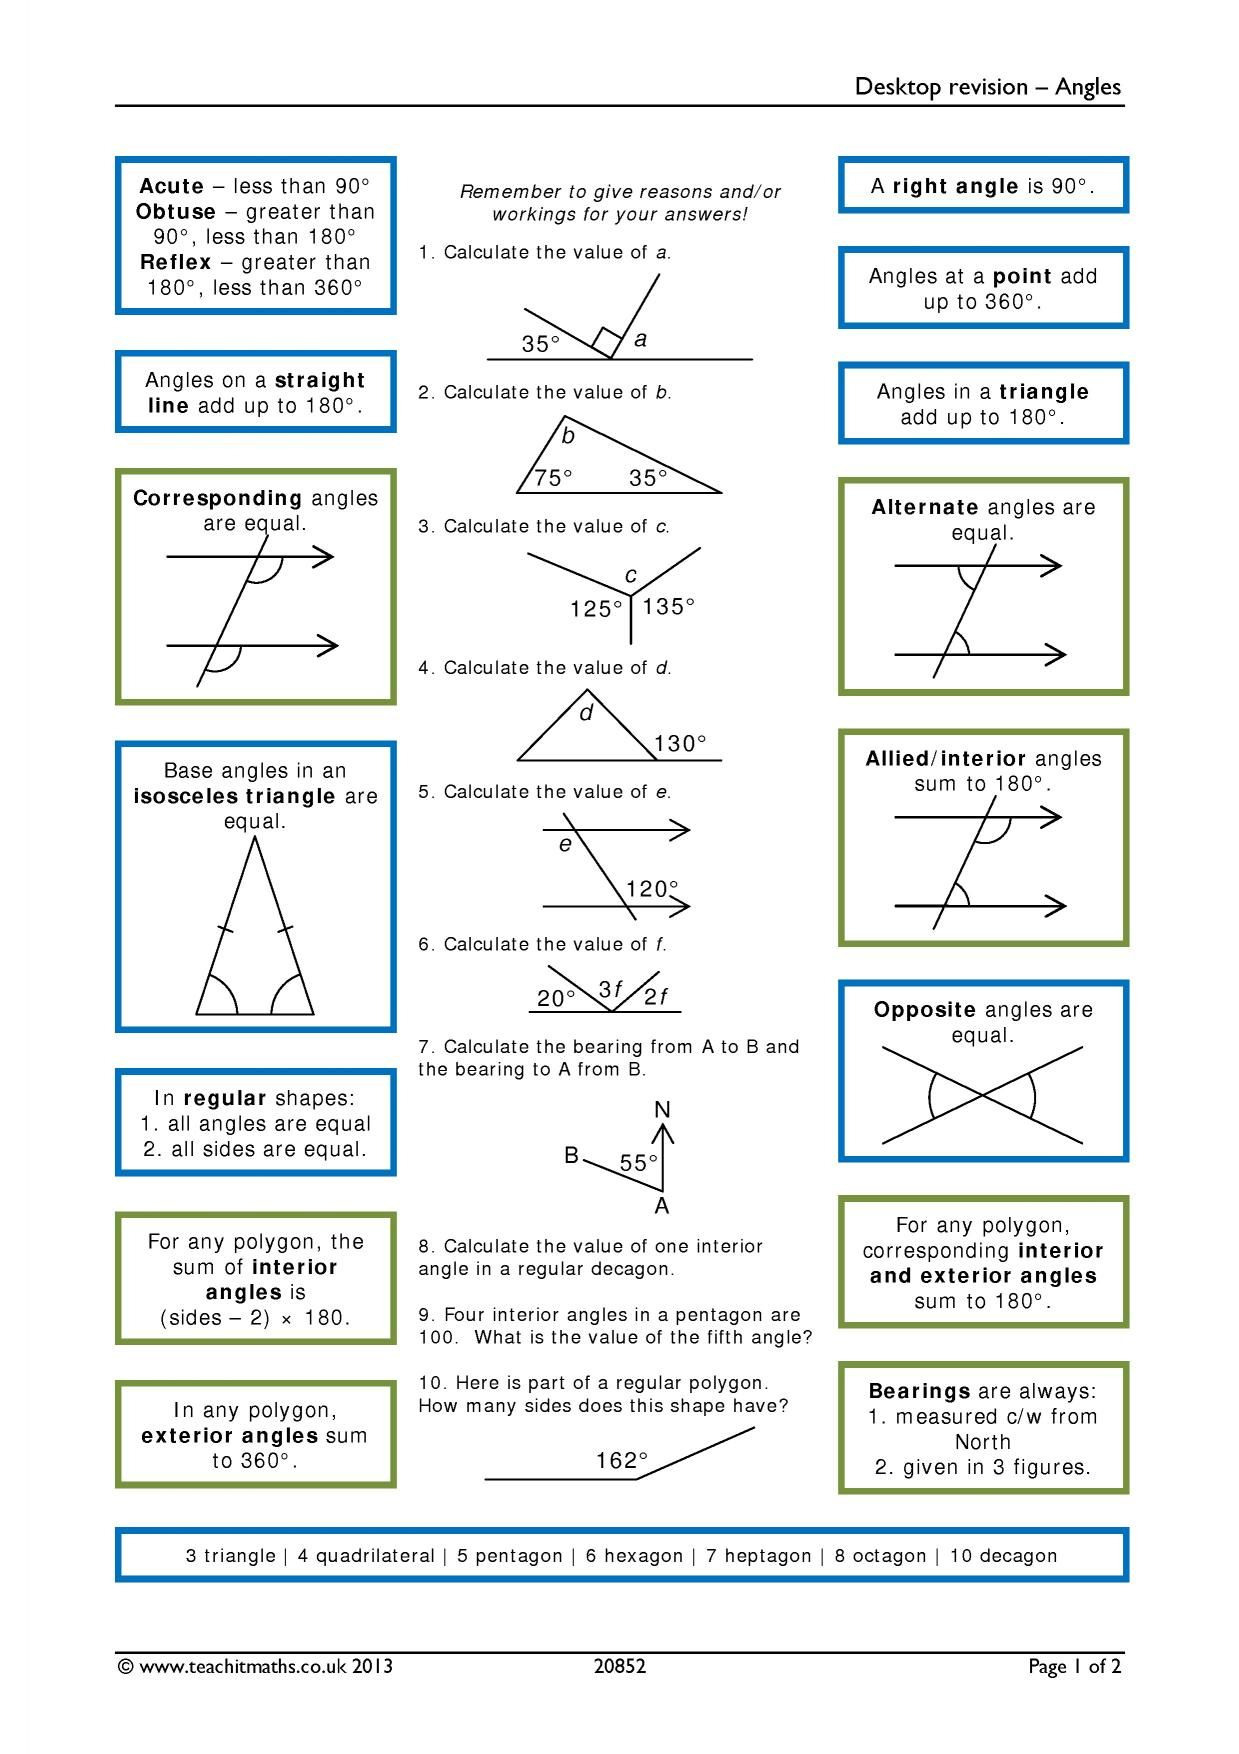 angles-in-polygons-worksheet-answers-db-excel